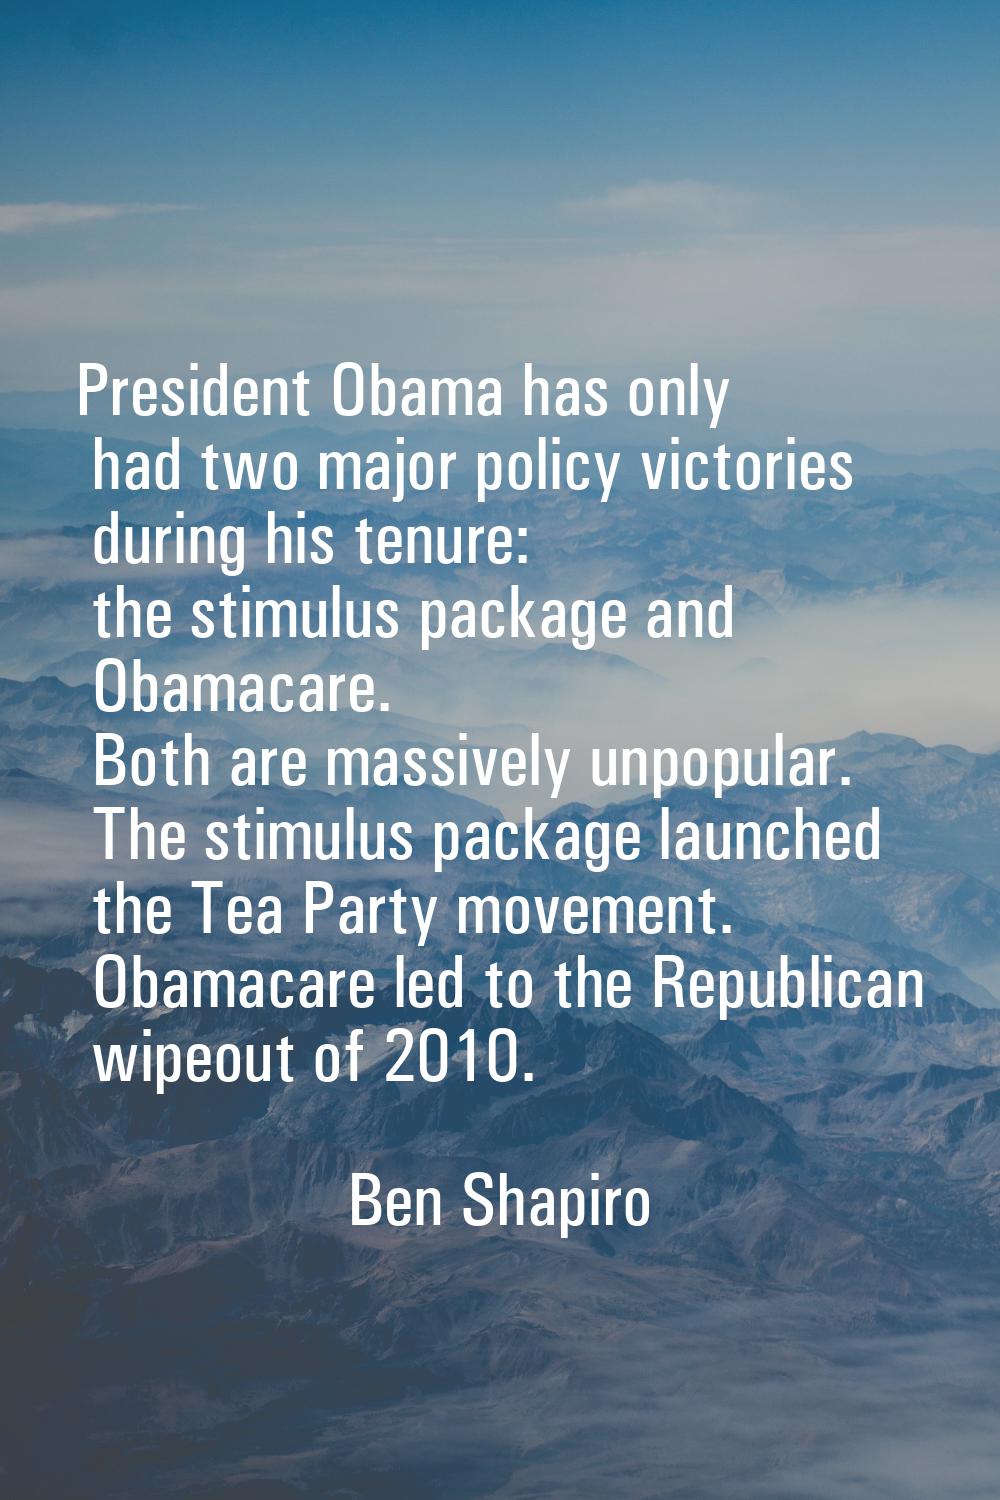 President Obama has only had two major policy victories during his tenure: the stimulus package and